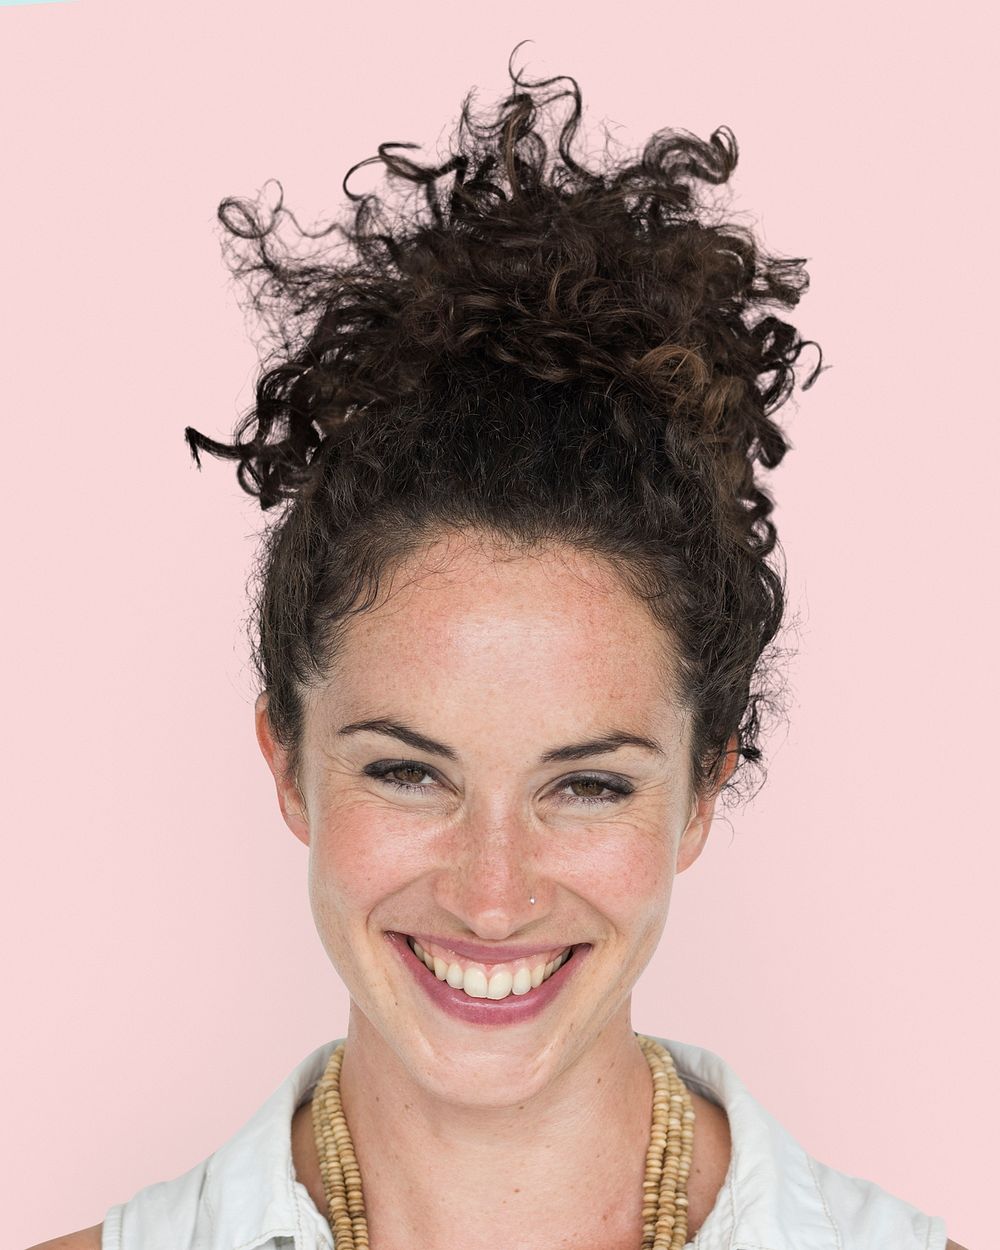 Curly haired woman portrait, smiling face close up